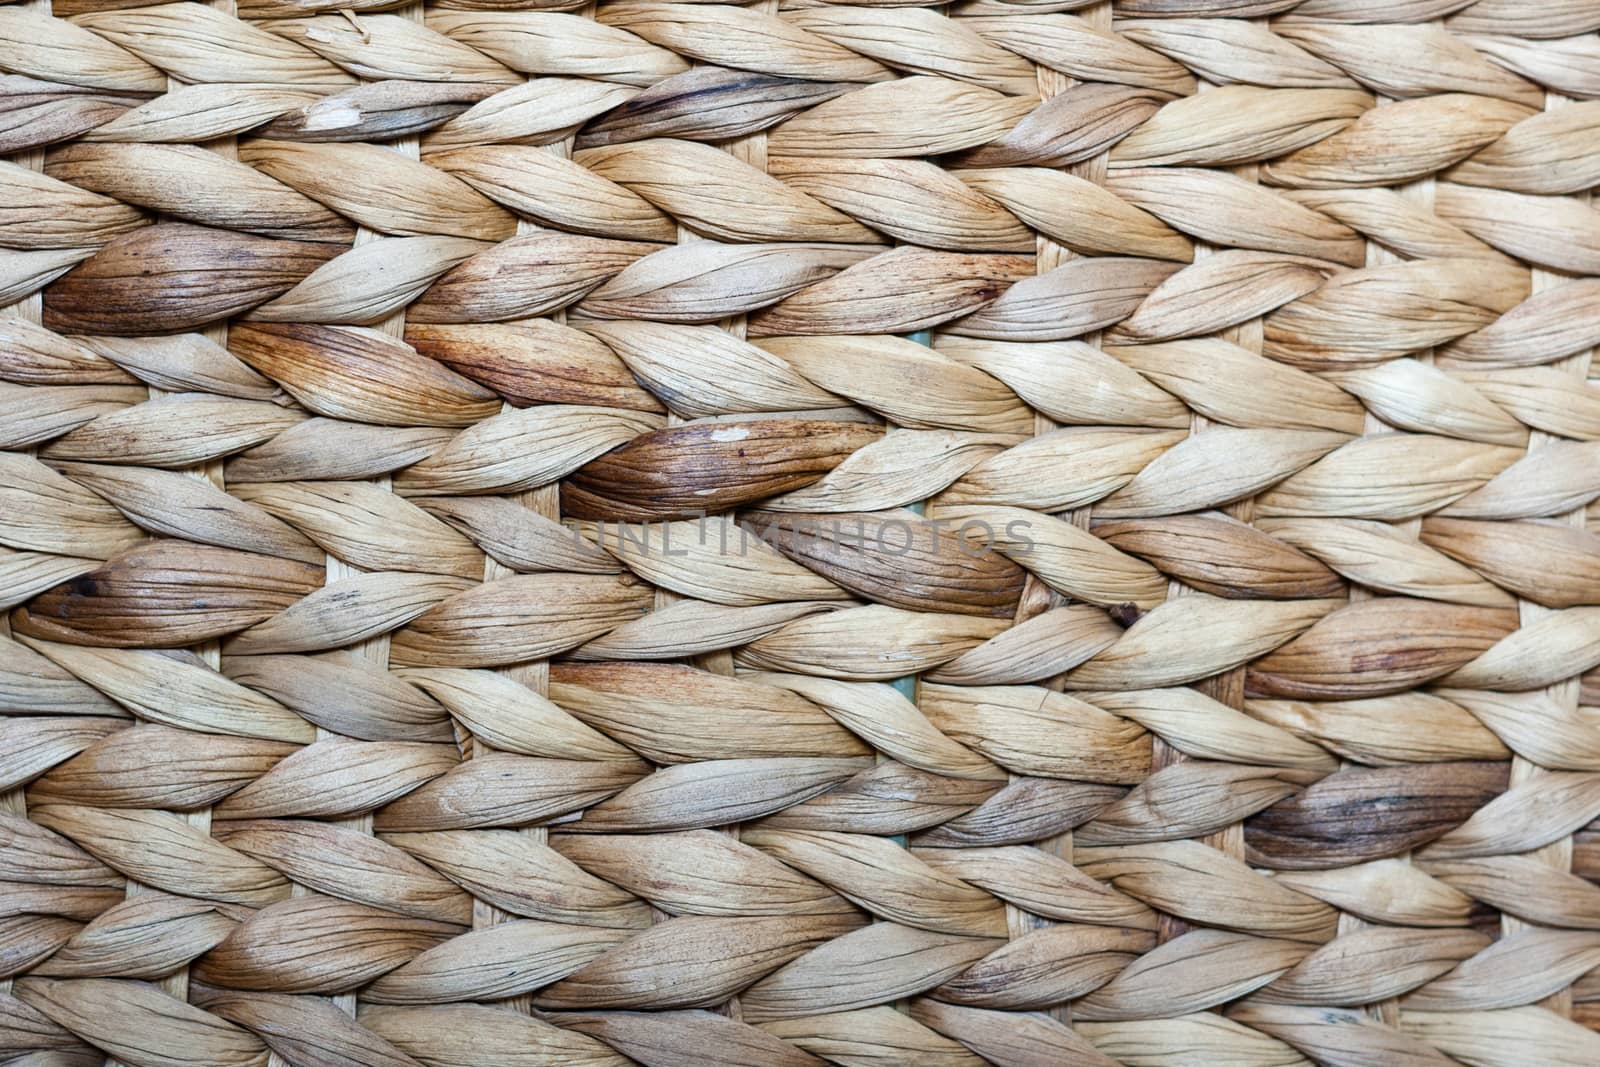 natural wicker basket close up texture background